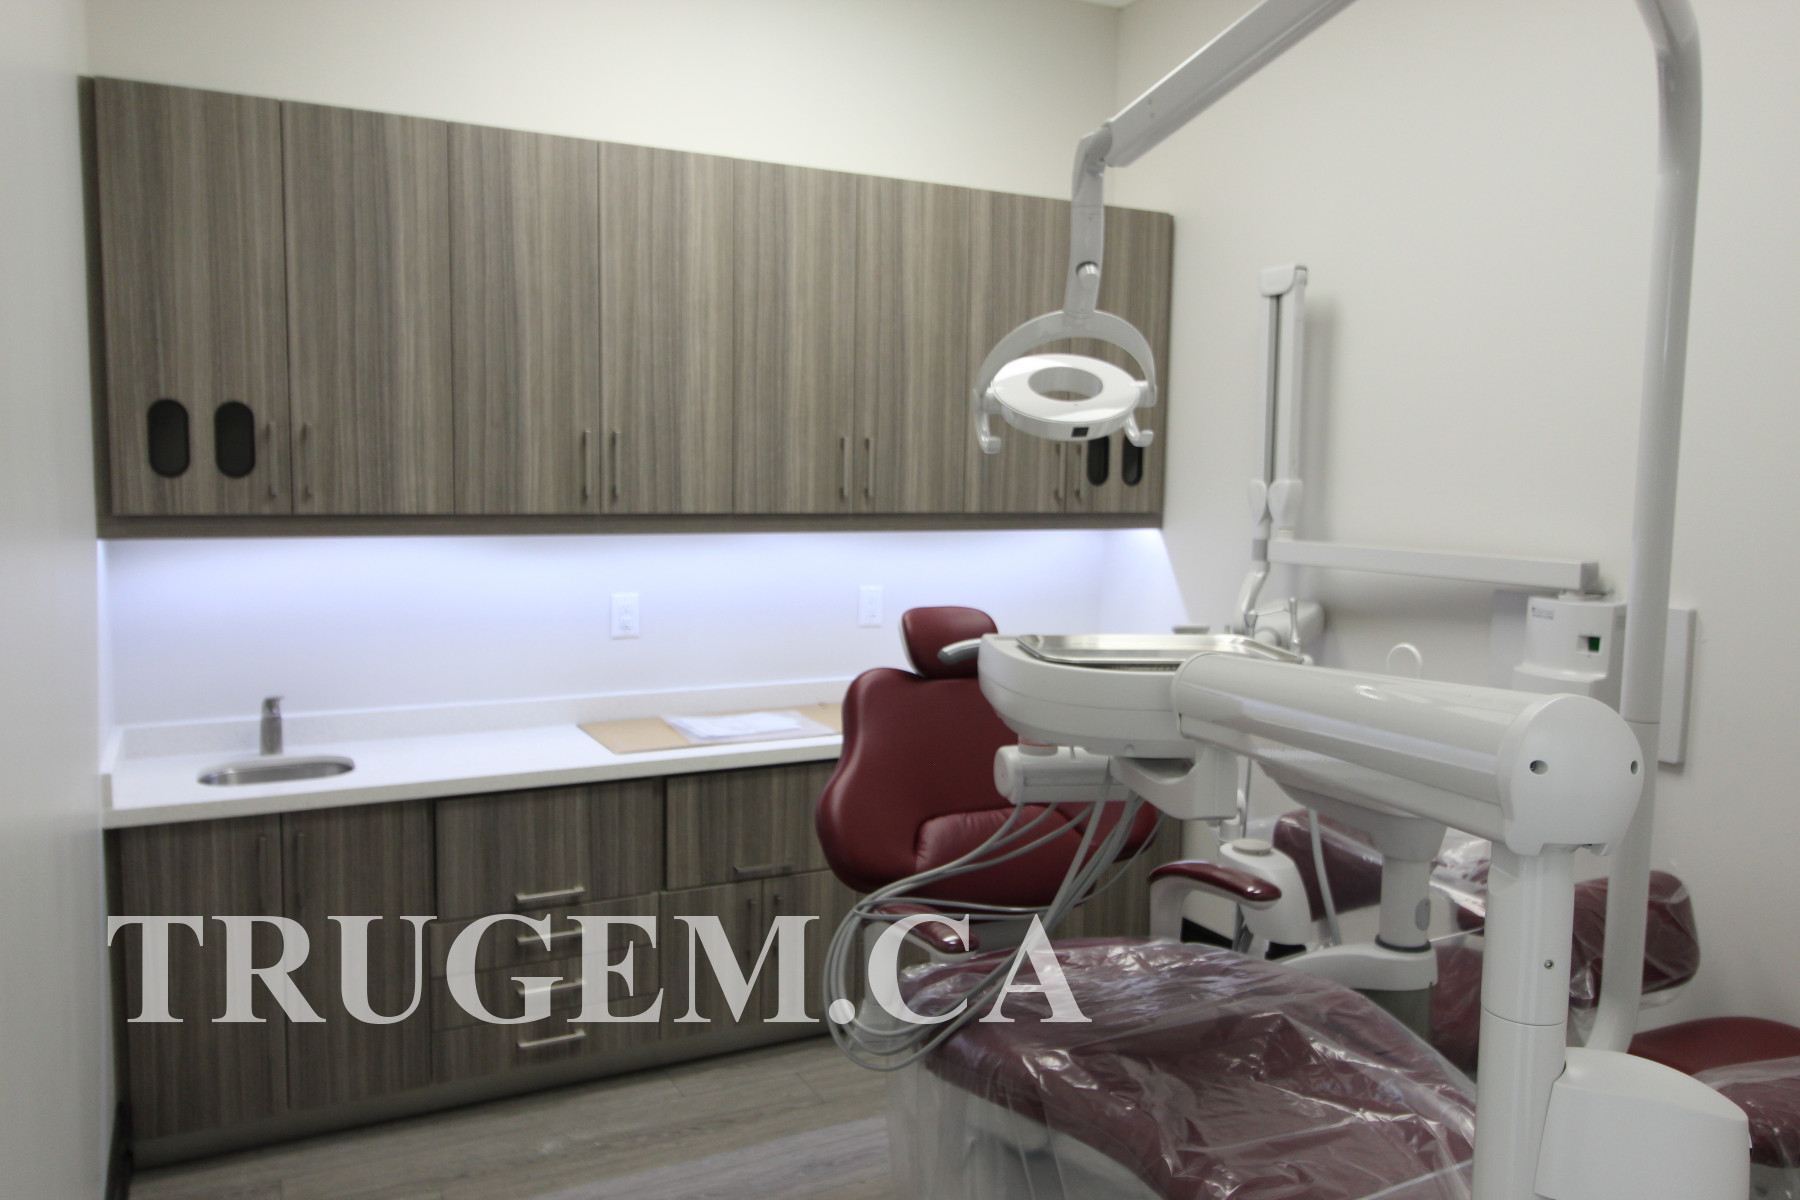 dental office design with cabinets